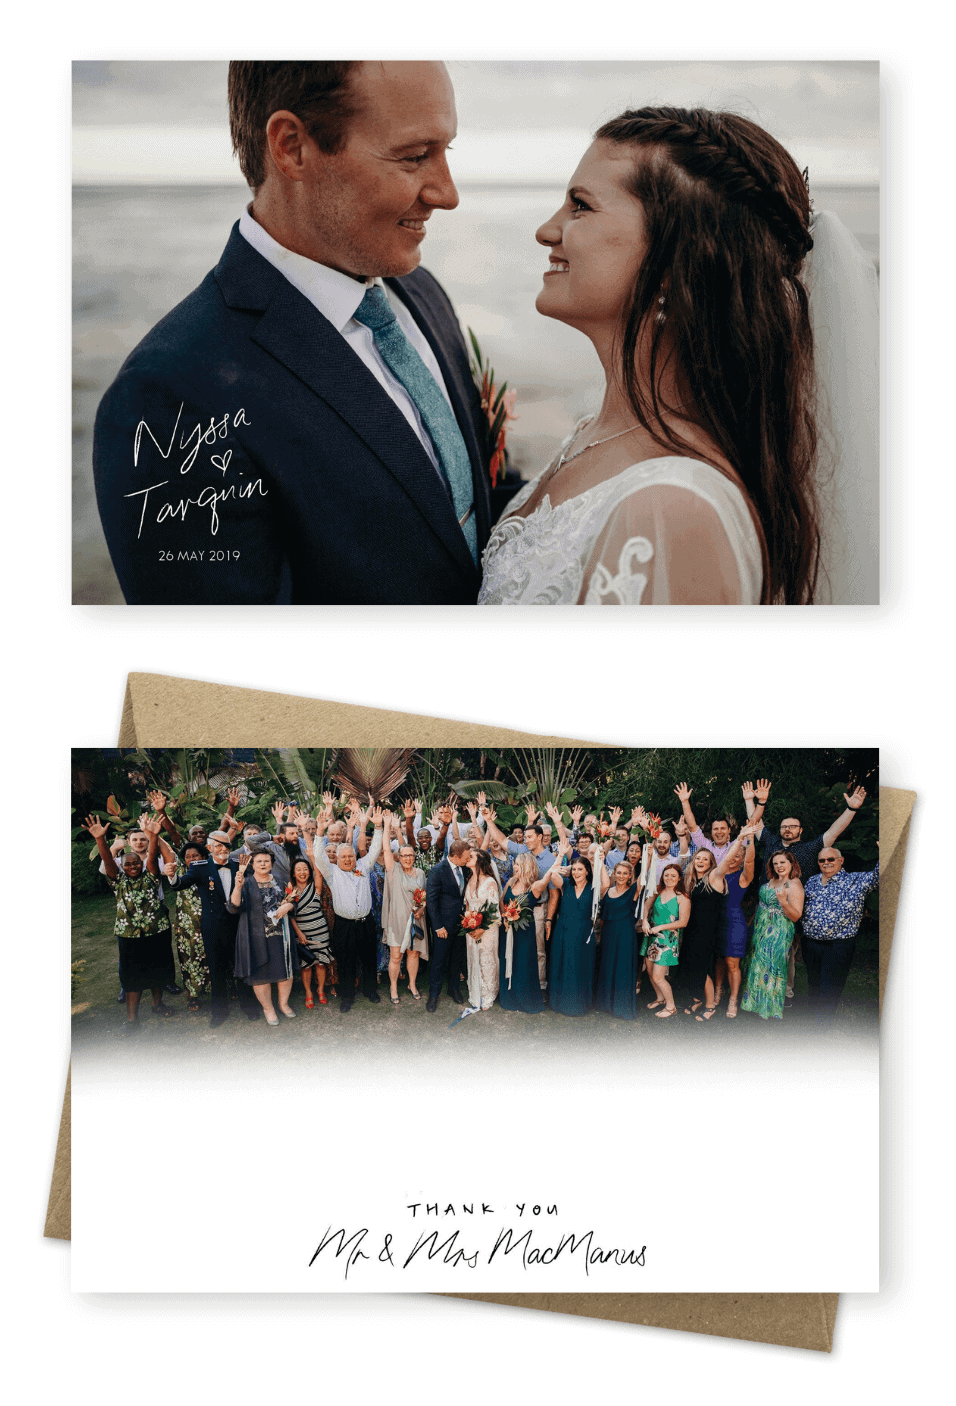 Wedding Thank You Messages from Bride and Groom What to Write in a Wedding Thank You Card For the Love of Stationery Luminosity Film Studios James Lippmann Photographer 2